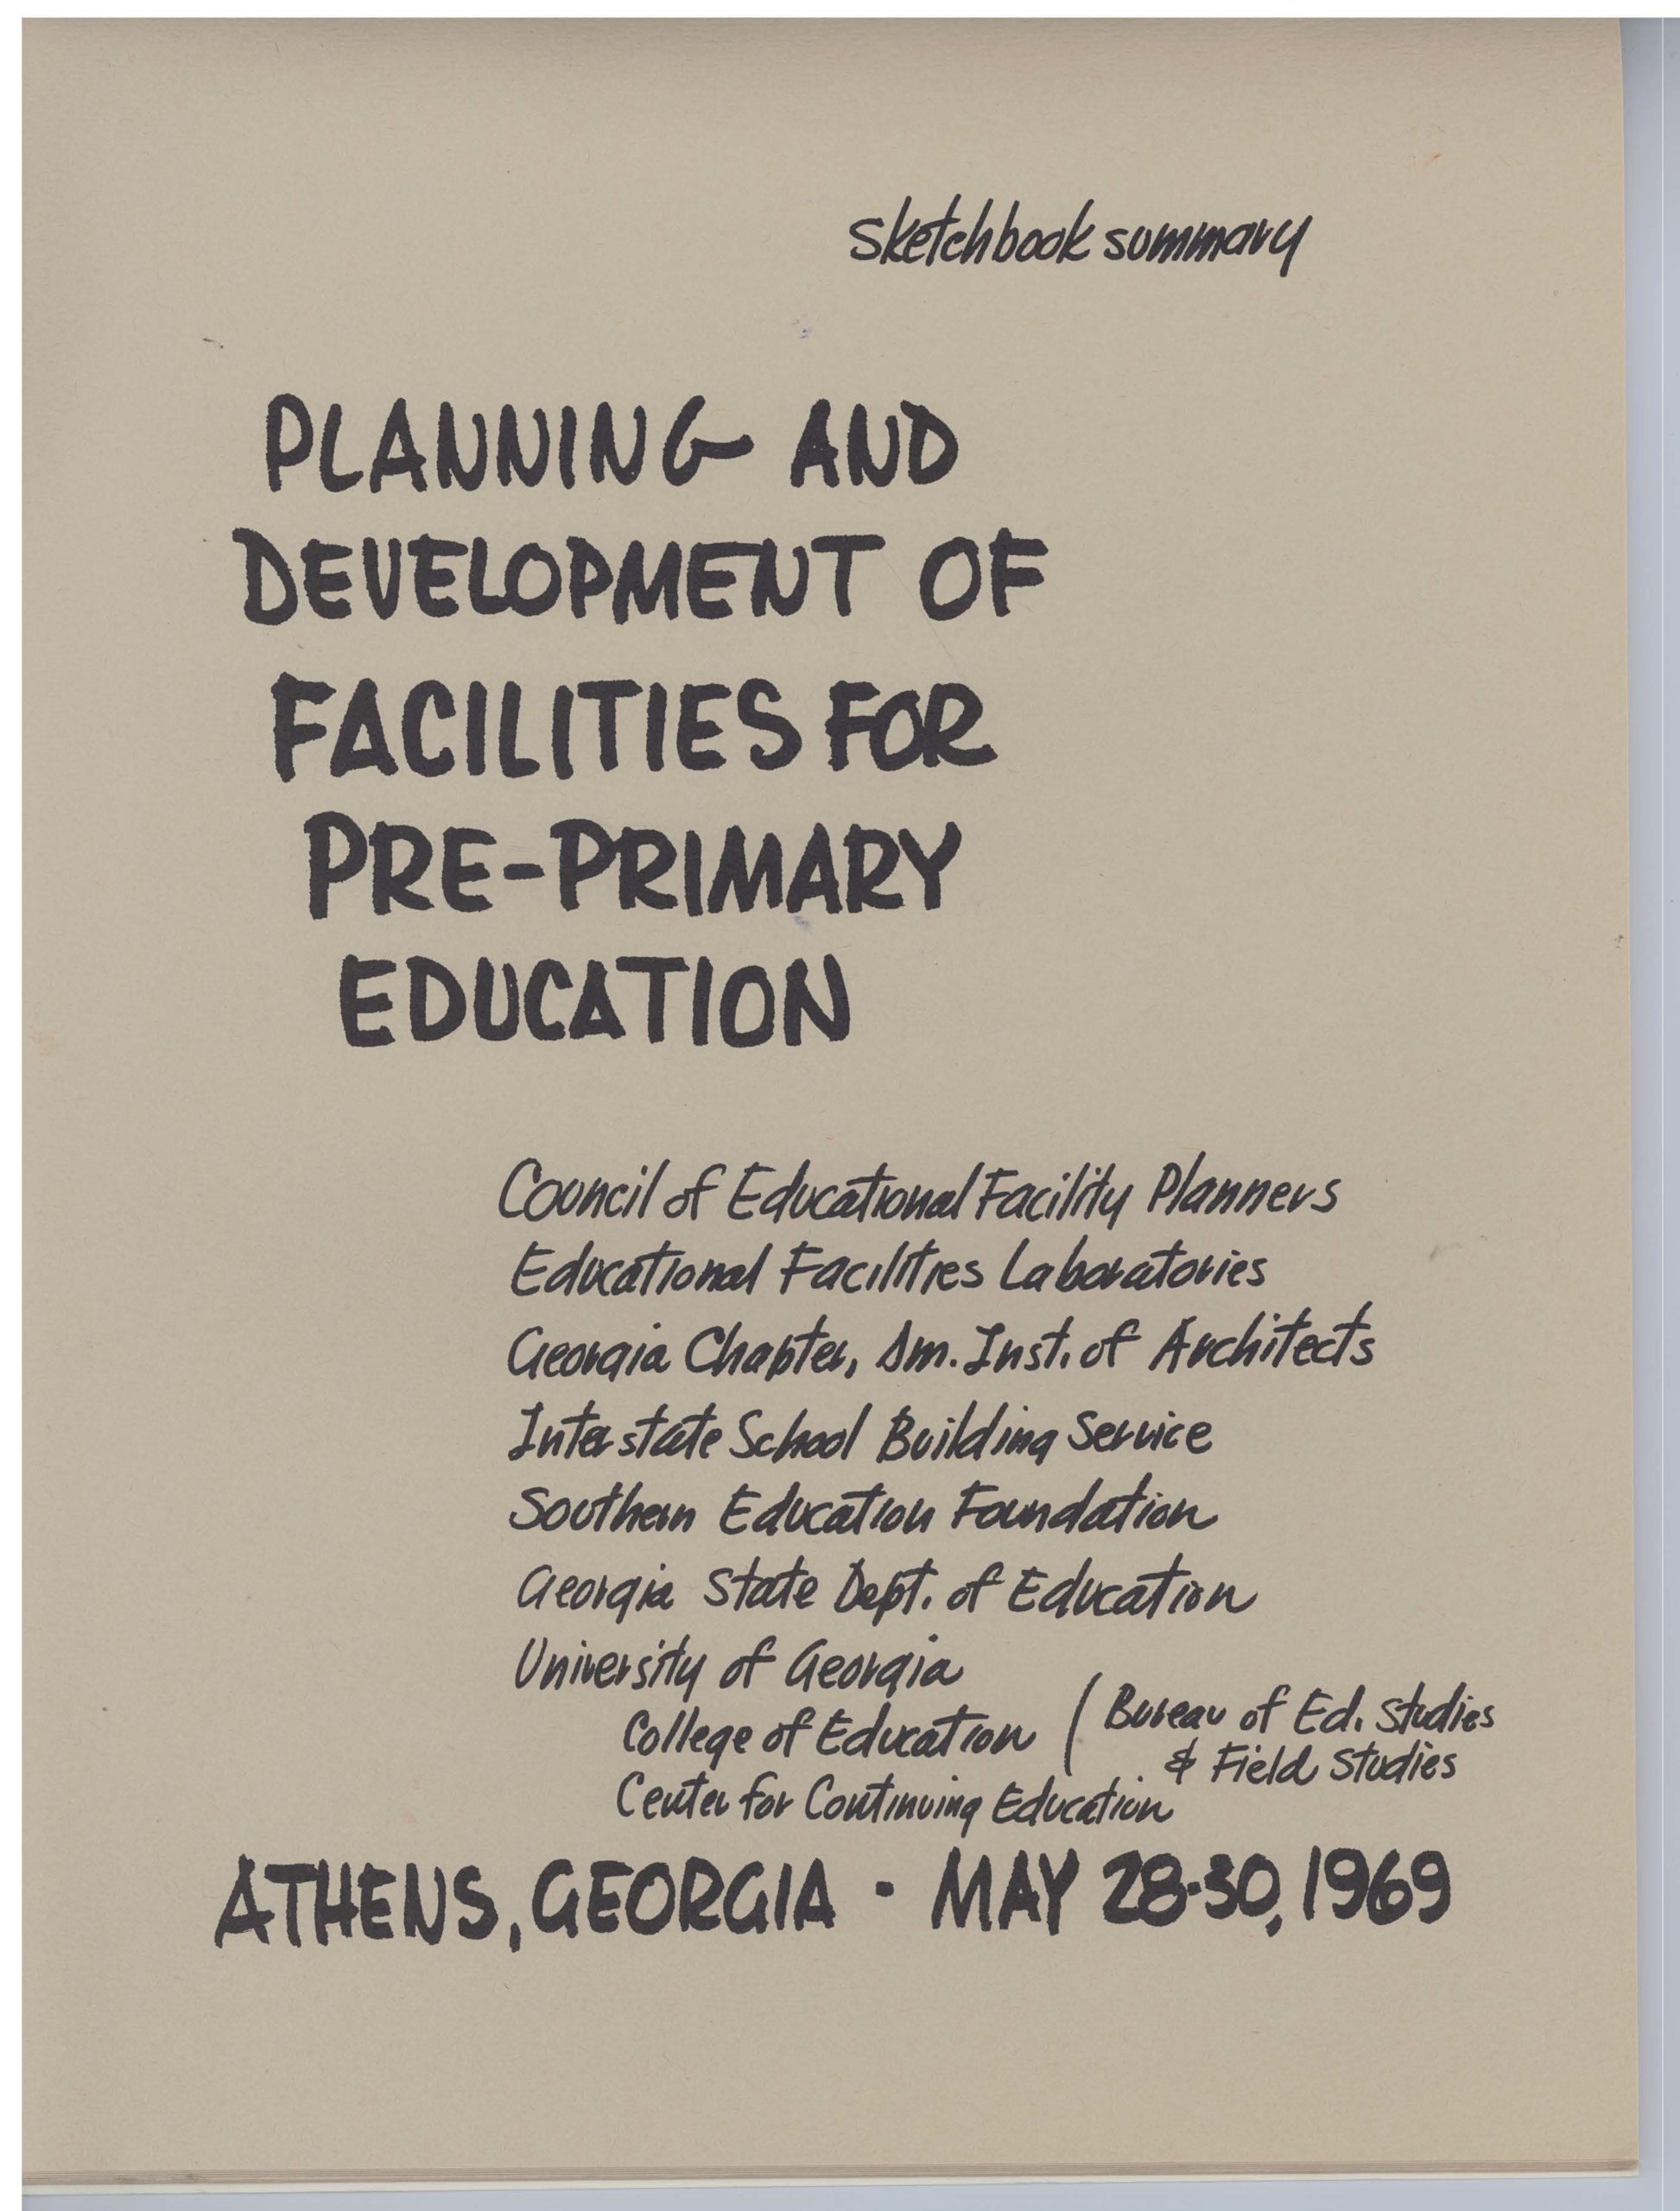 Planning and Development of Facilities for PrePrimary Education_Brubaker Conference Summary Sketchbook 1969_Page_02